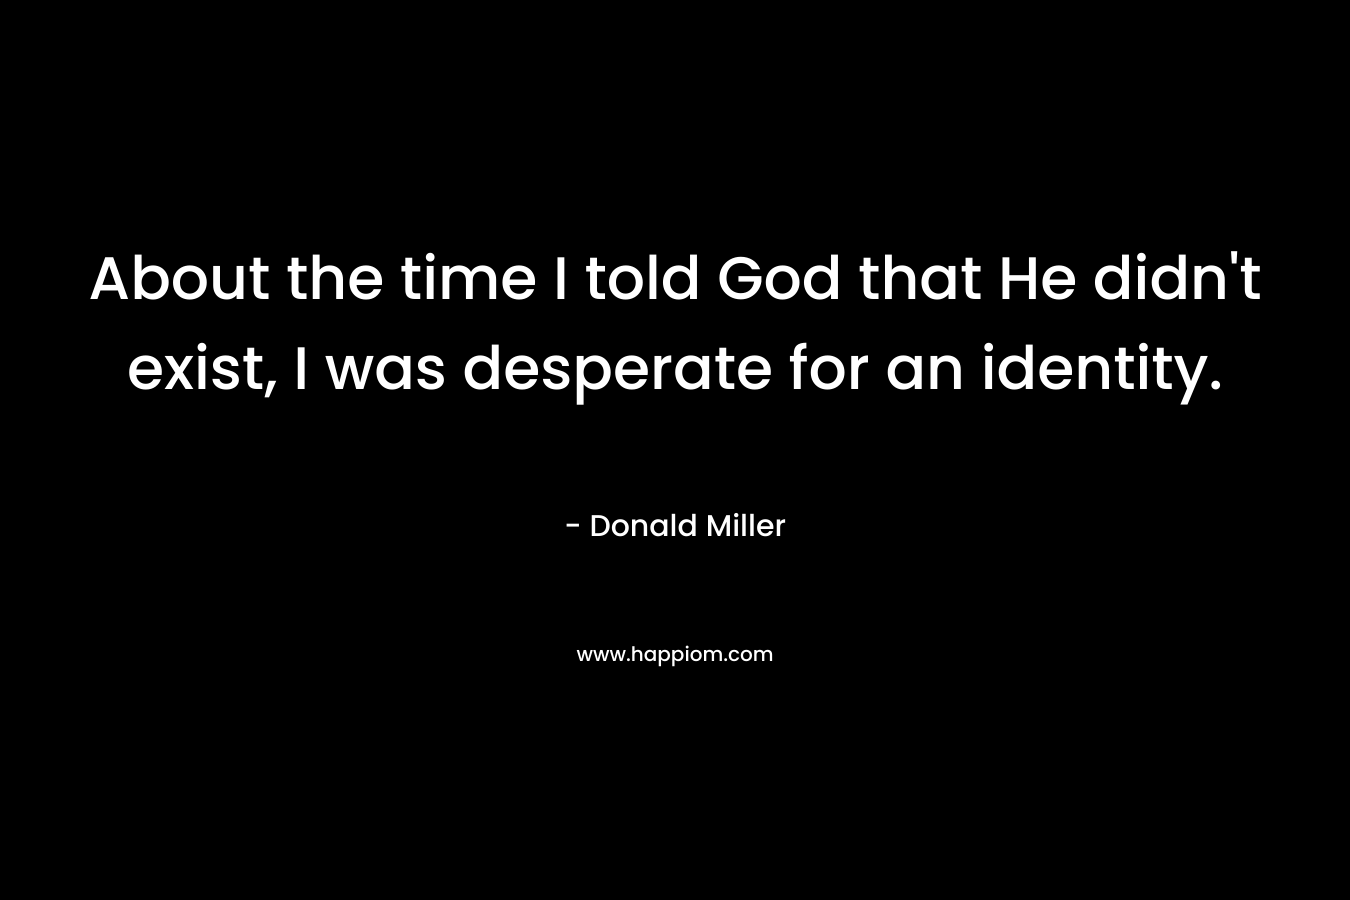 About the time I told God that He didn’t exist, I was desperate for an identity. – Donald Miller